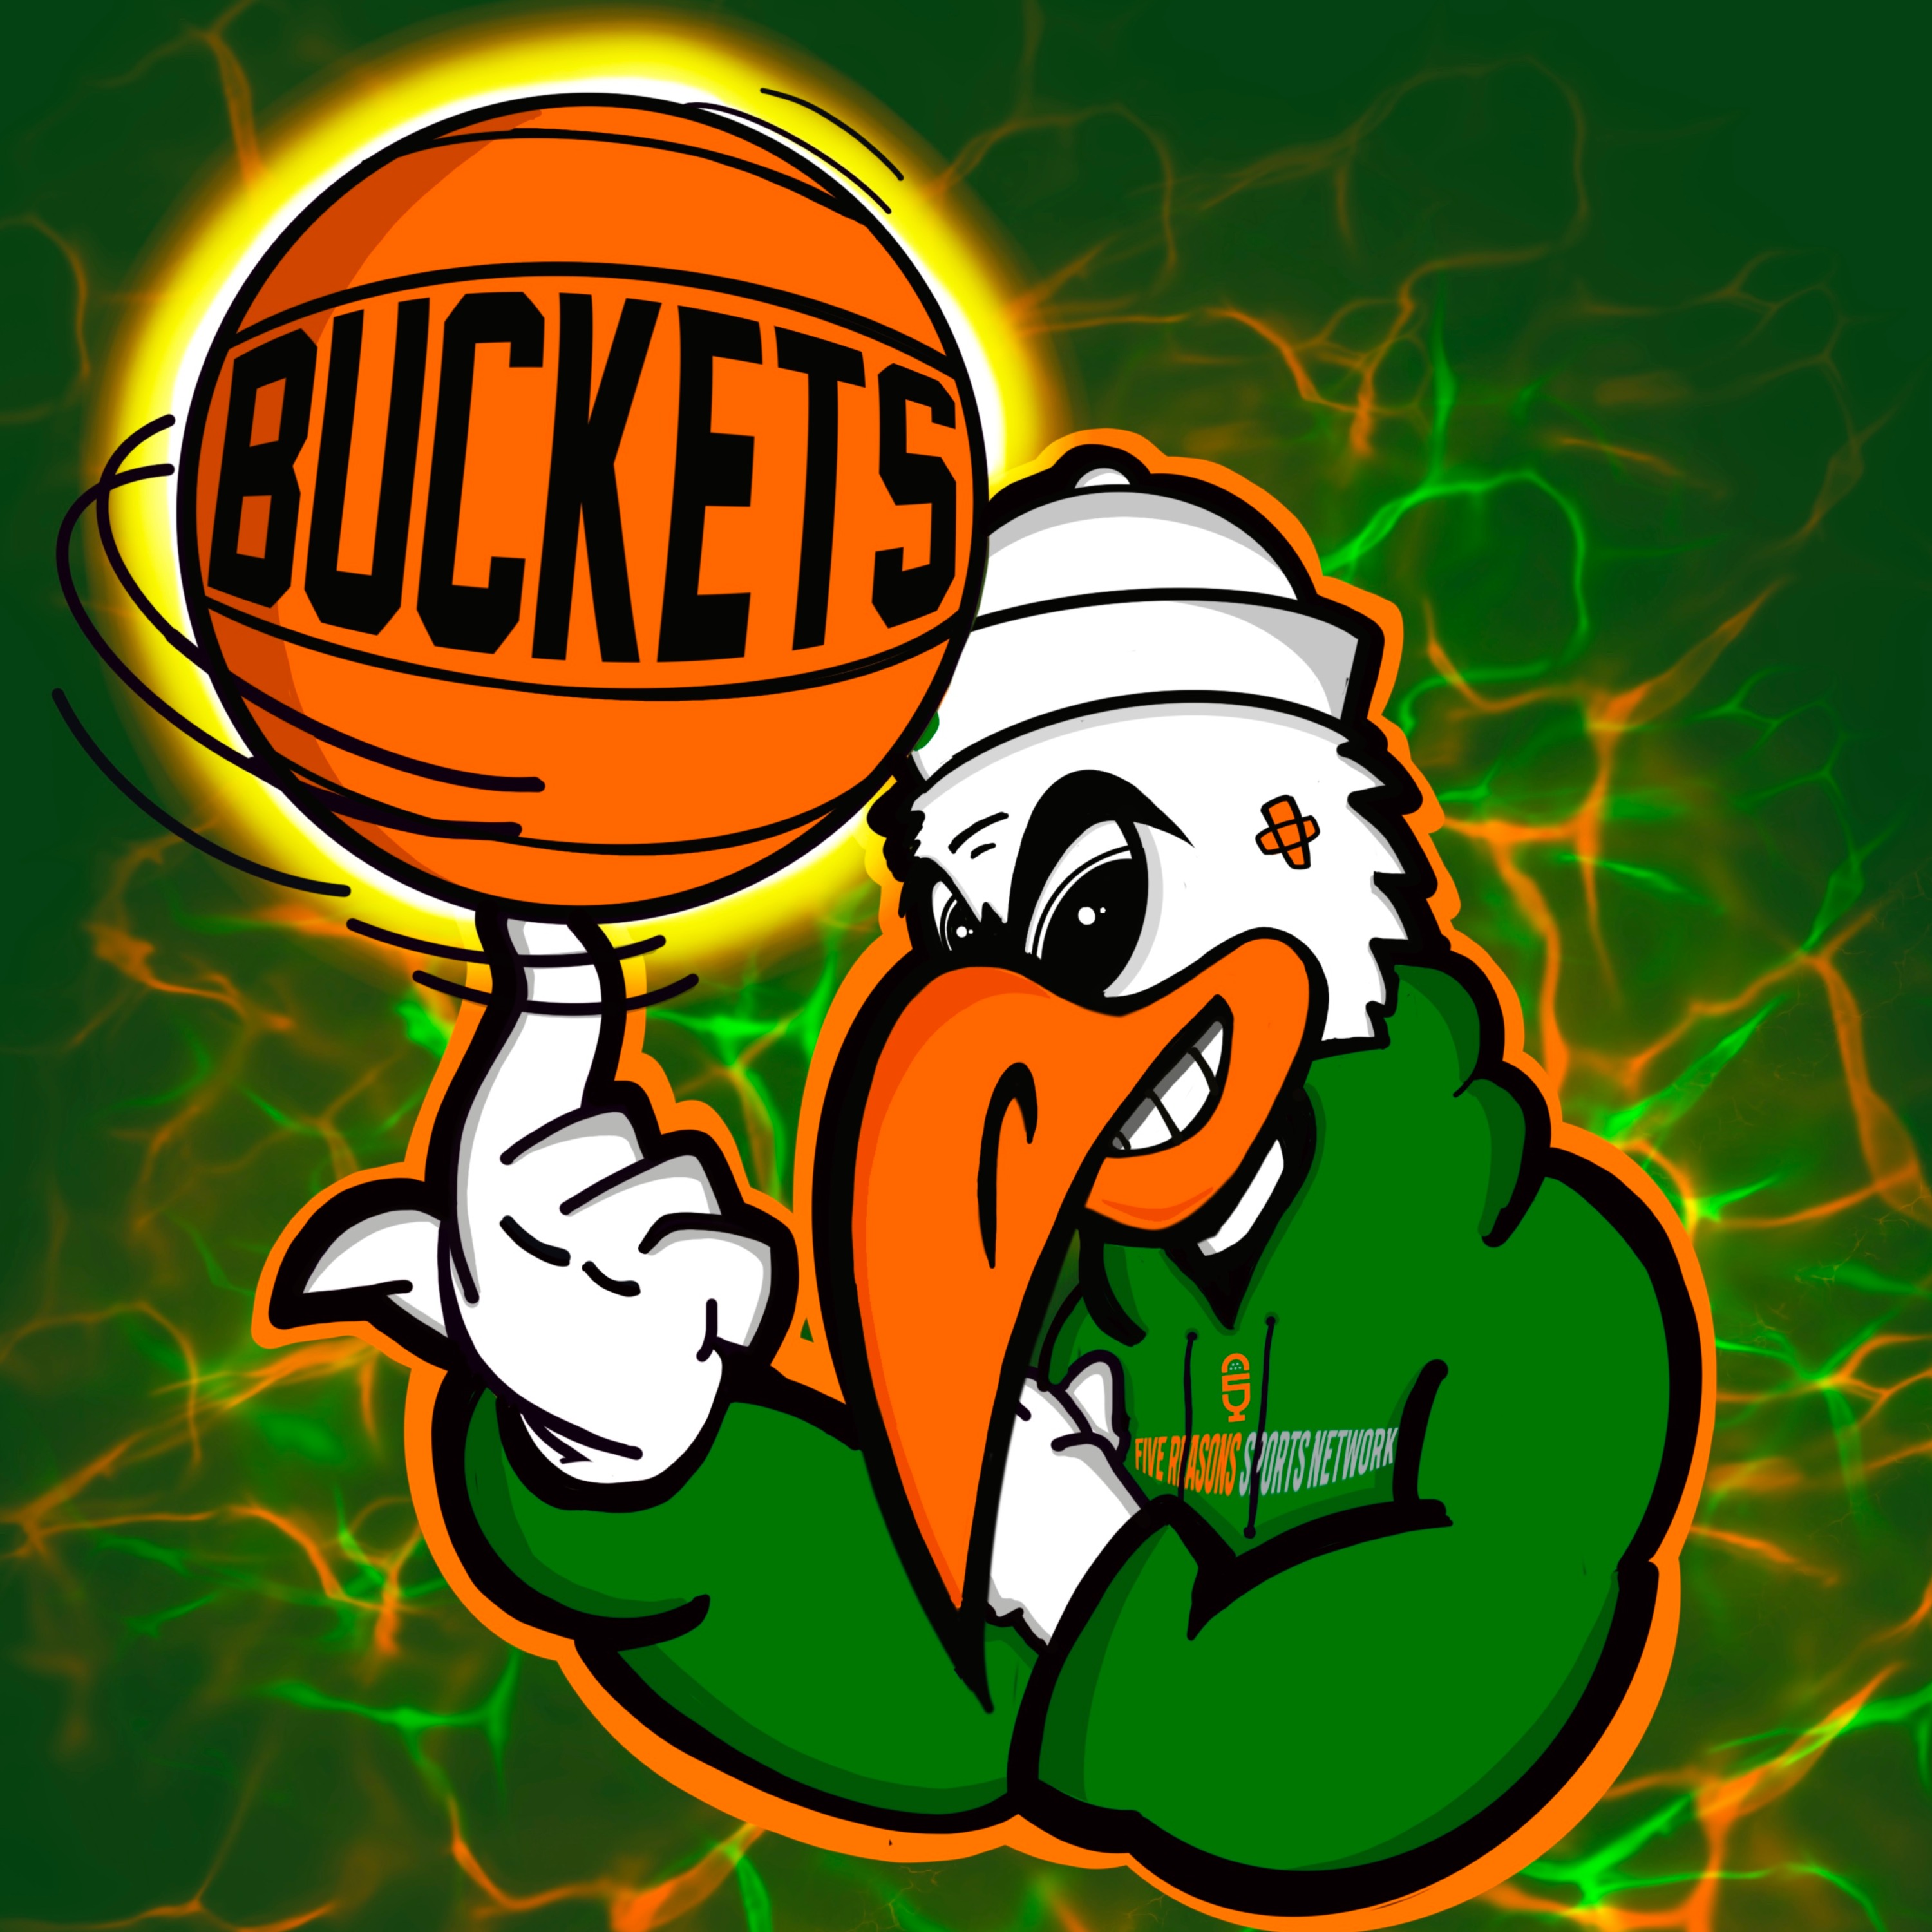 Where will the Canes Be Seeded? | Buckets